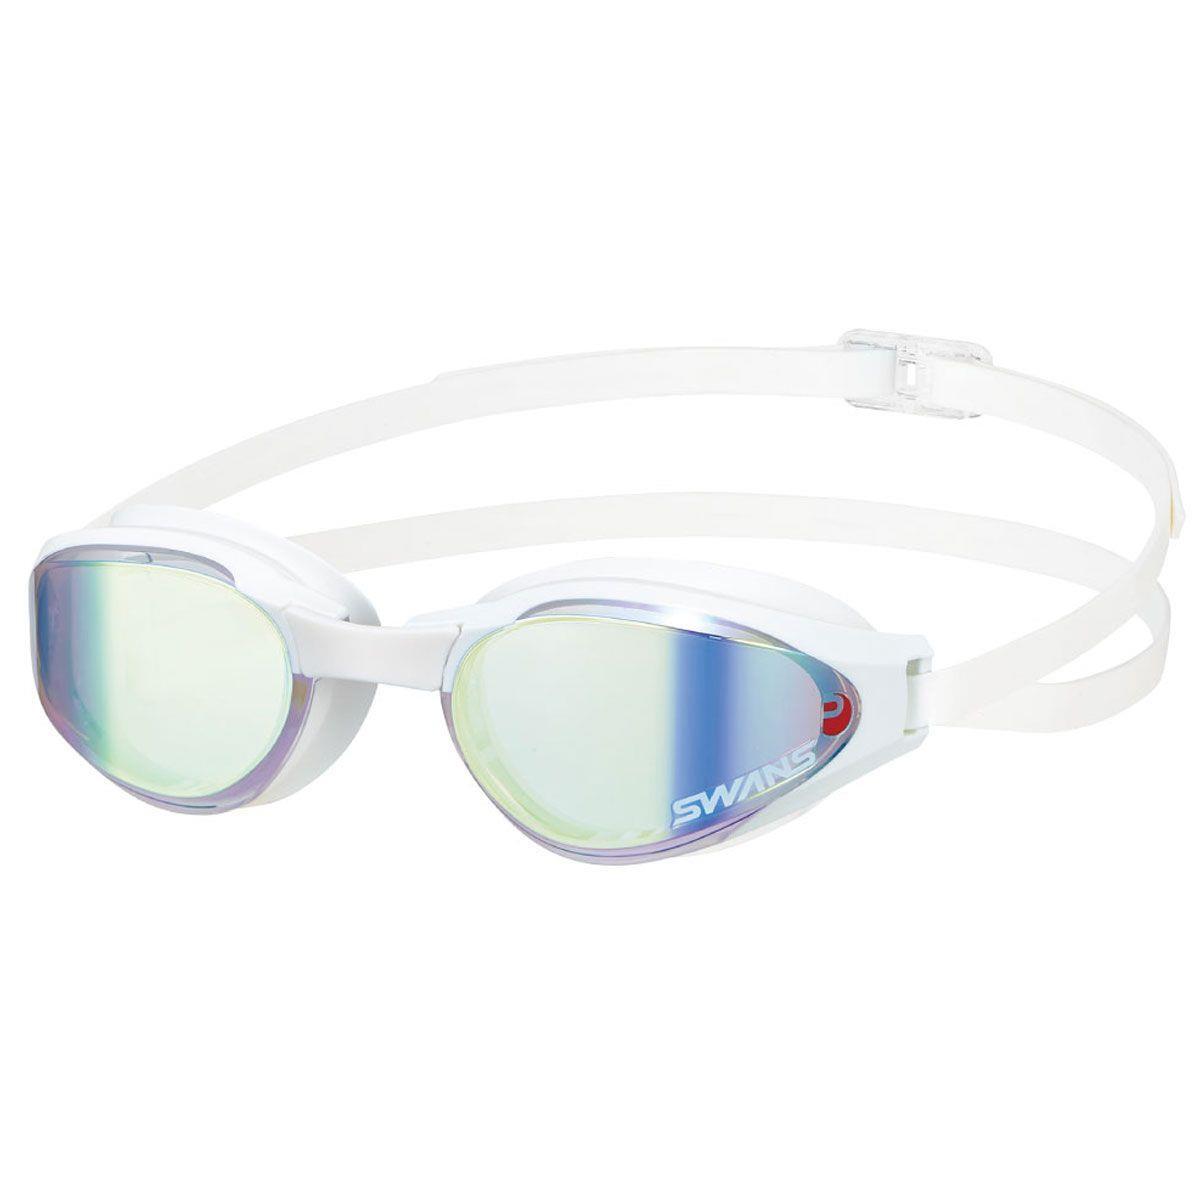 Swans SR81 Ascender Mirrored Goggles - White / Yellow 1/1